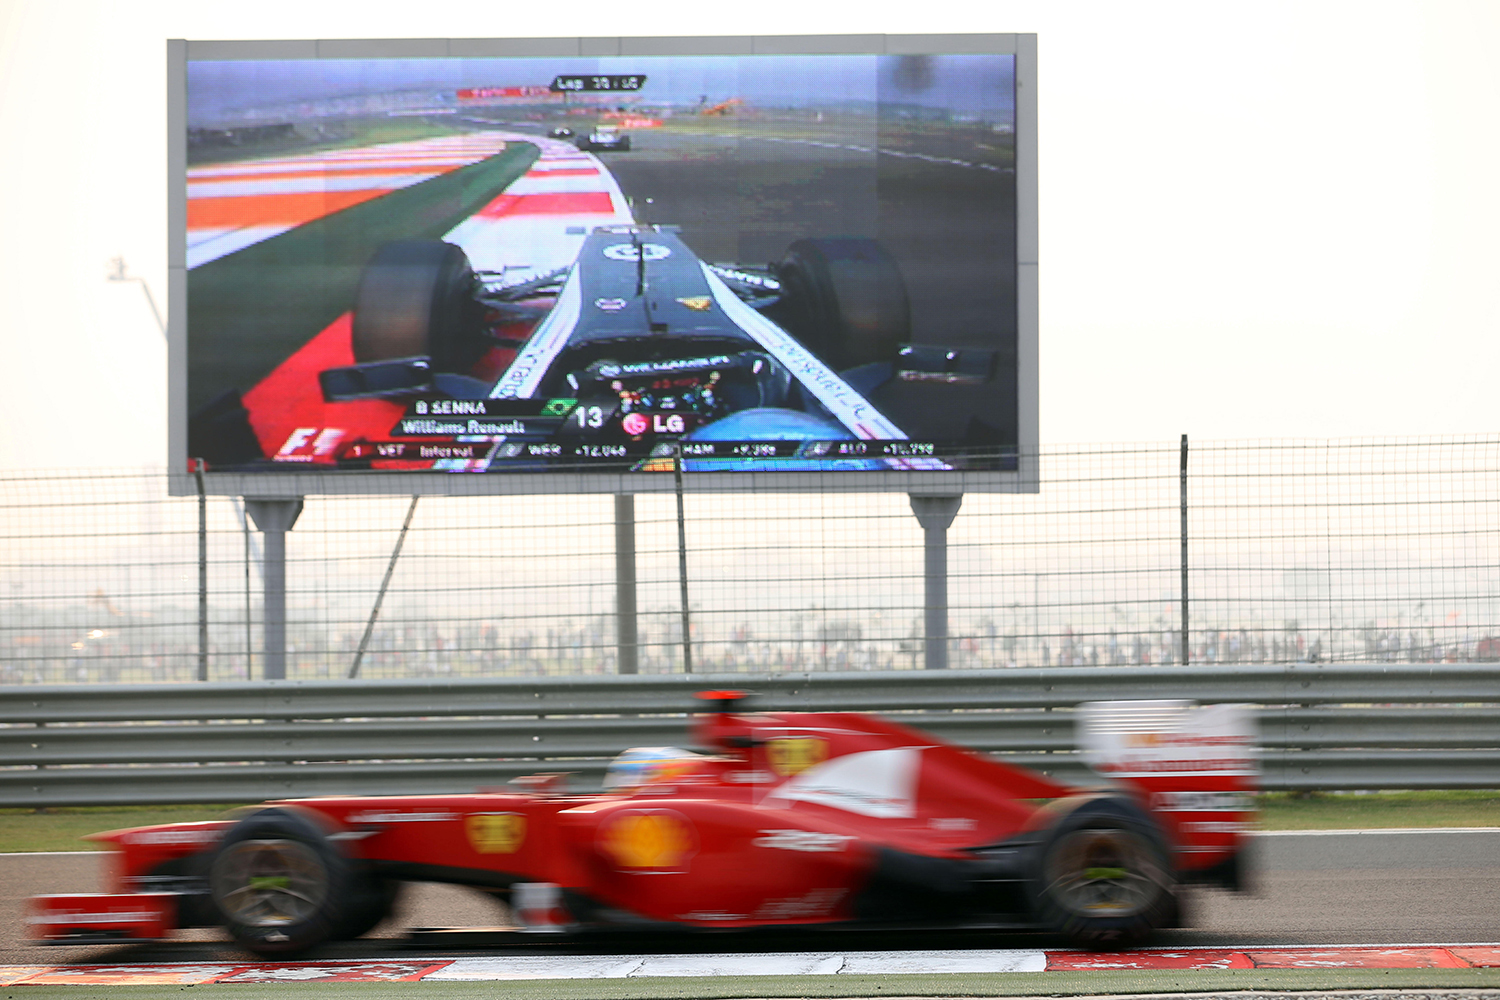 D5YK1Y Spanish Formula One driver Fernando Alonso of Ferrari steers his car in front of a video screen during the Formula One Grand Prix of India at the race track Buddh International Circuit, Greater Noida, India, 28 October 2012. Photo: Jens Buettner/dpa  +++(c) dpa - Bildfunk+++